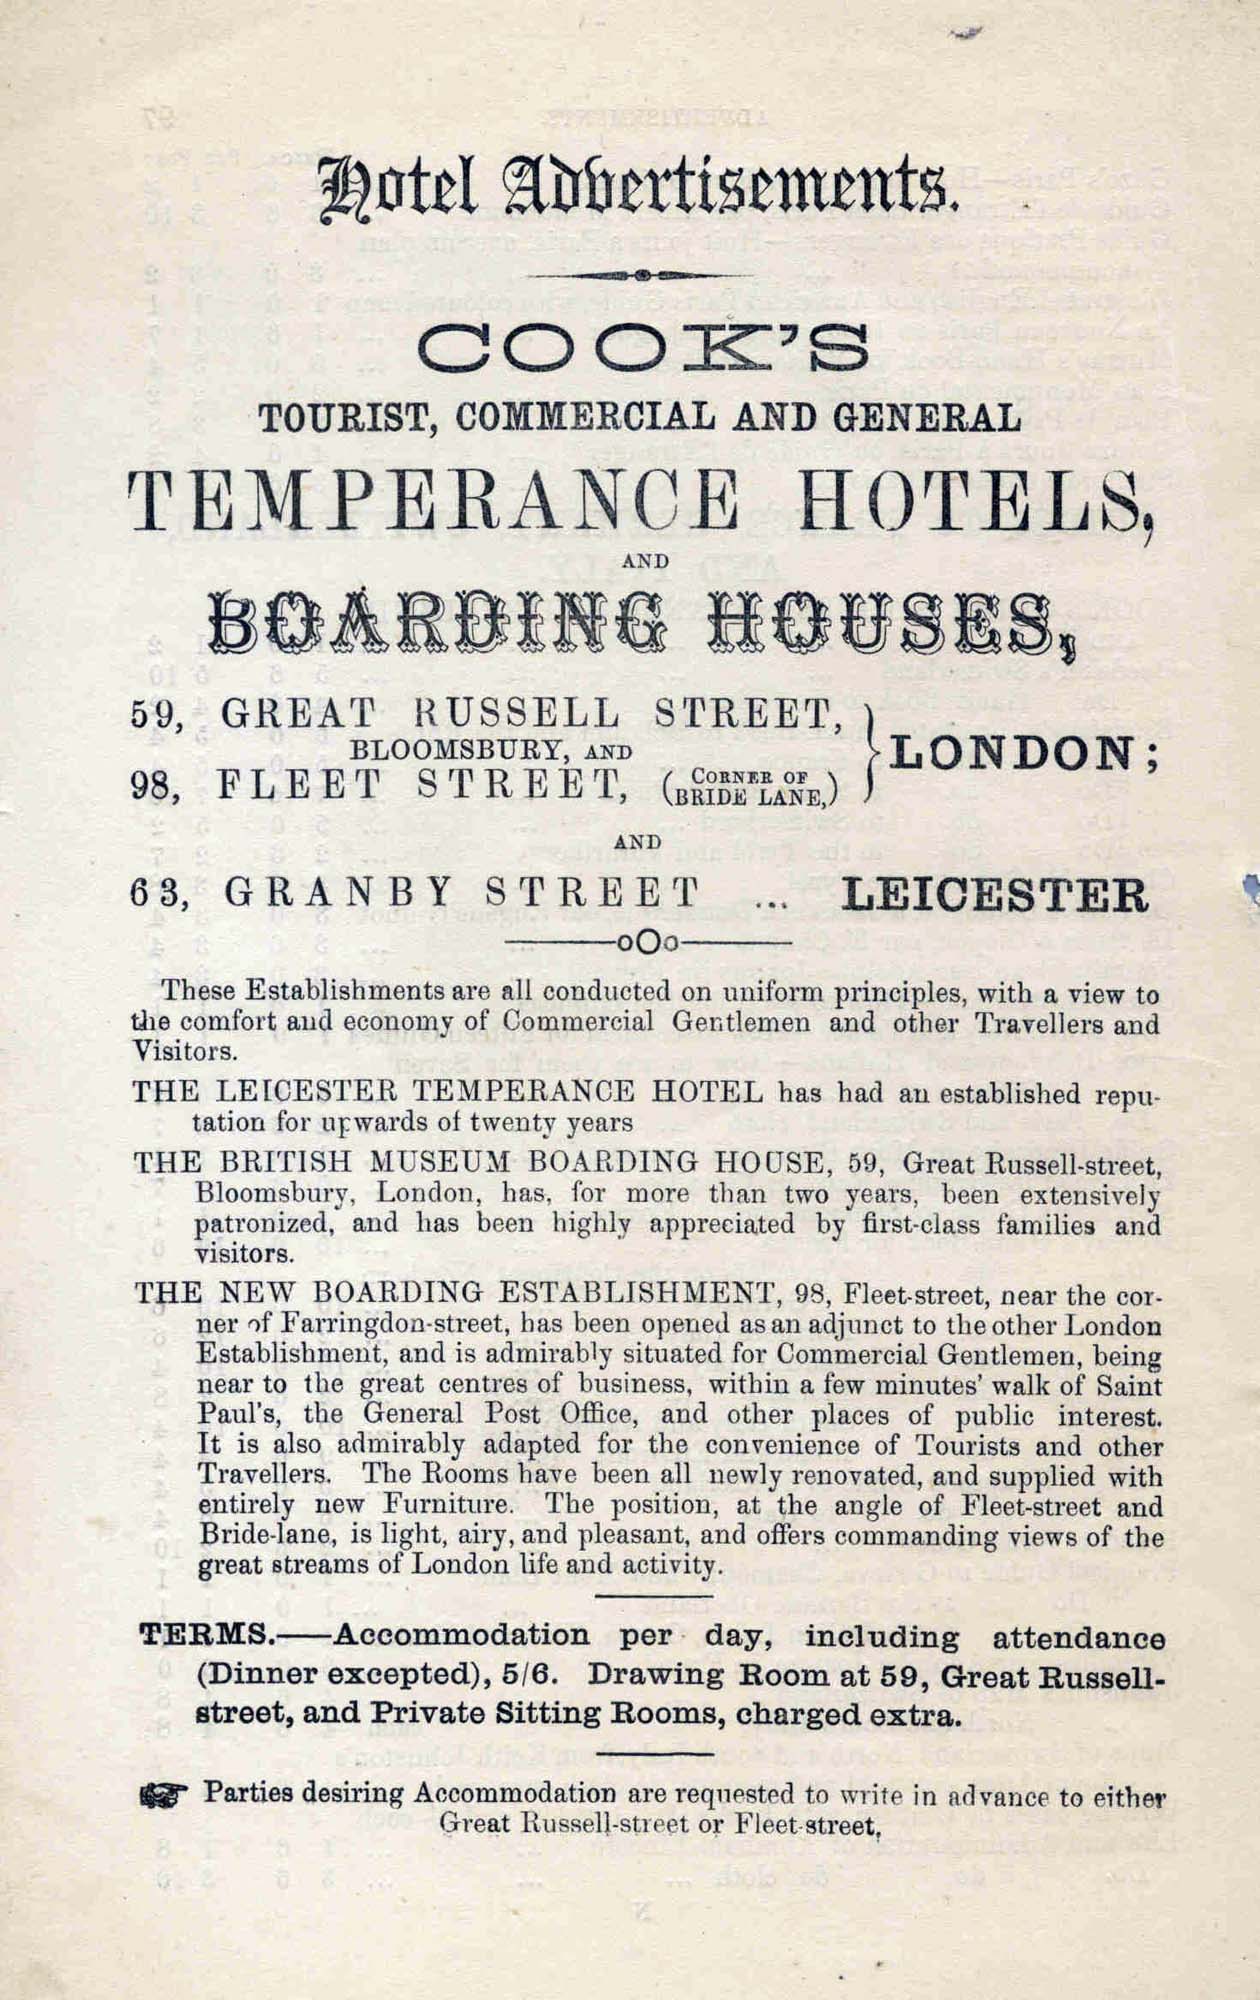 An advertisement for Cook’s Temperance Hotel - Thomas Cook Archives